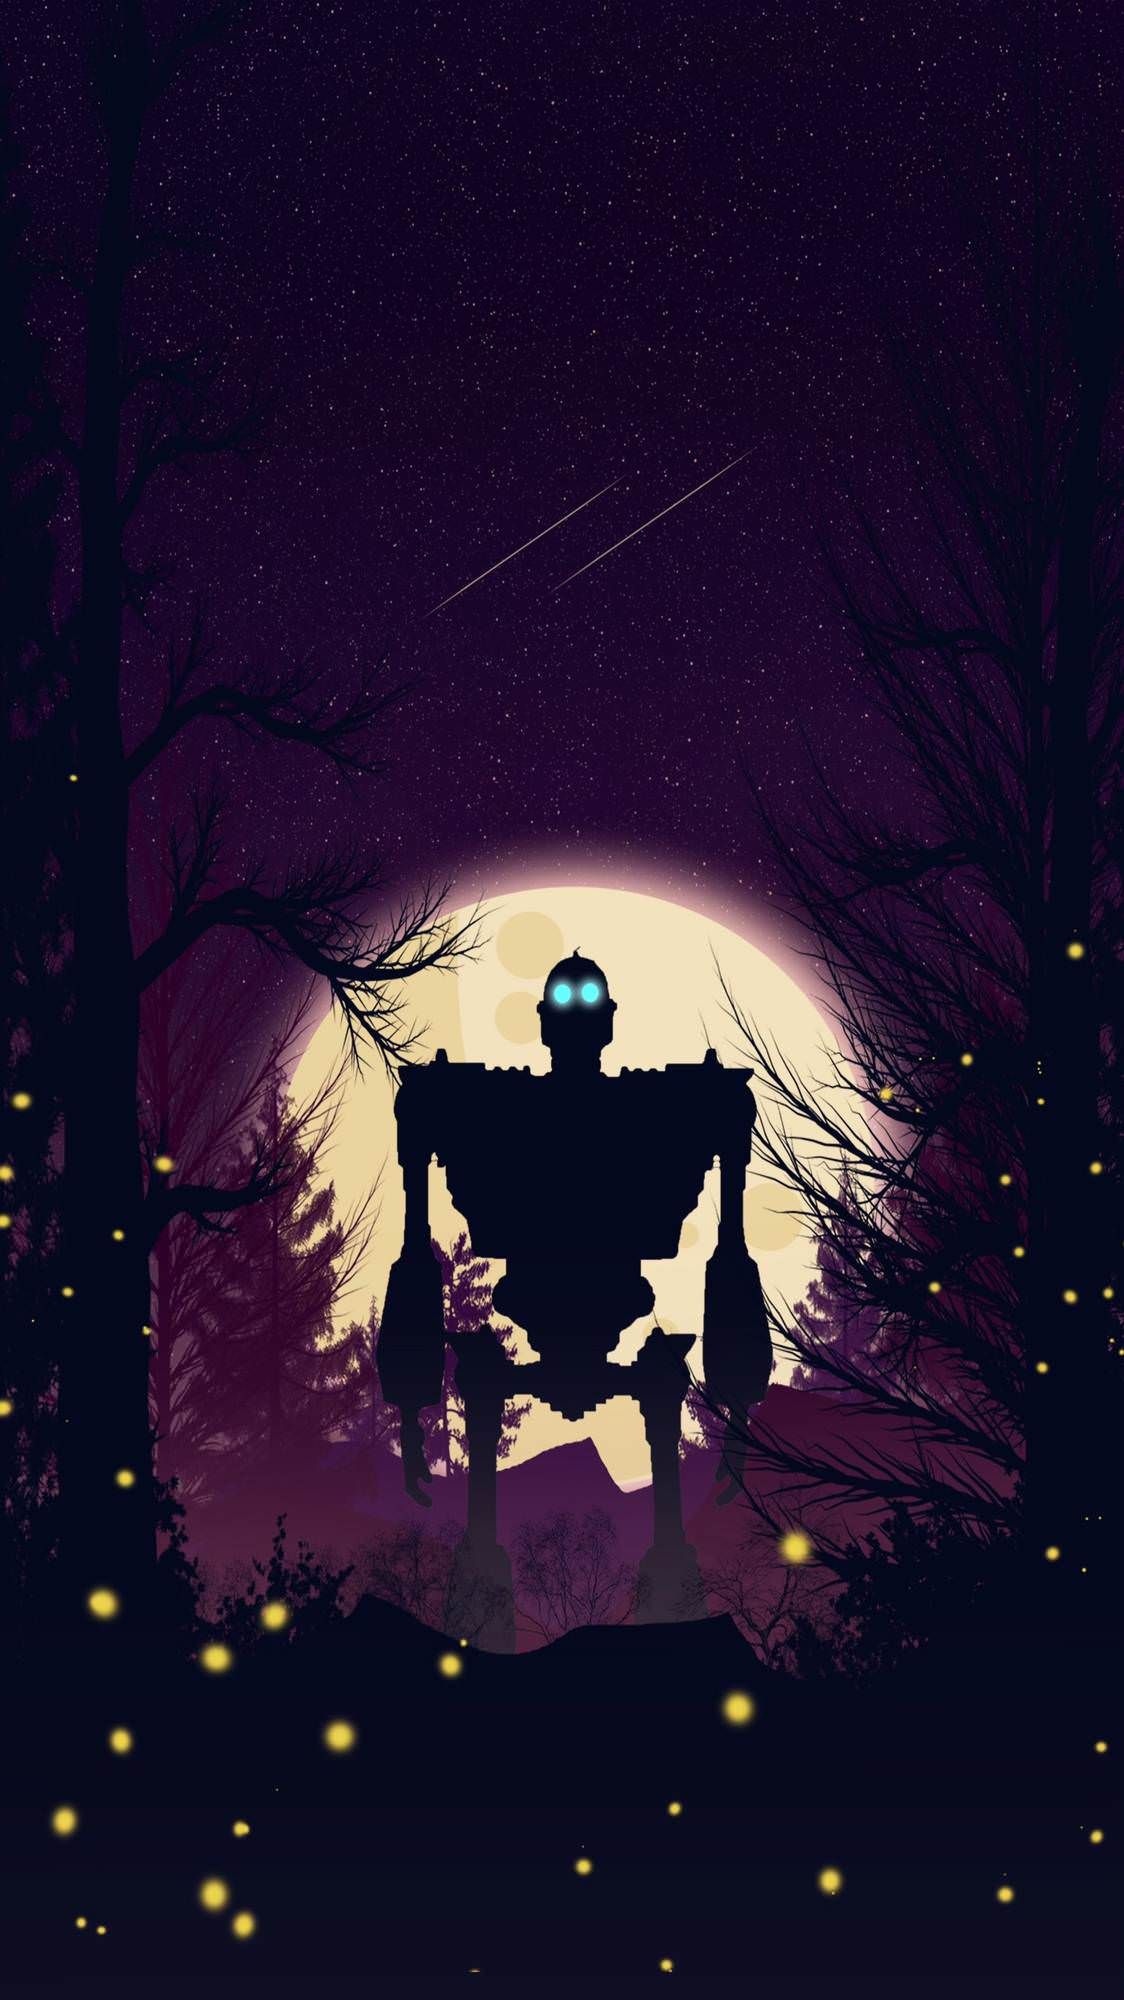 Iron Giant wallpapers, Posted by fans, Community submissions, Stunning wallpapers, 1130x2000 HD Handy